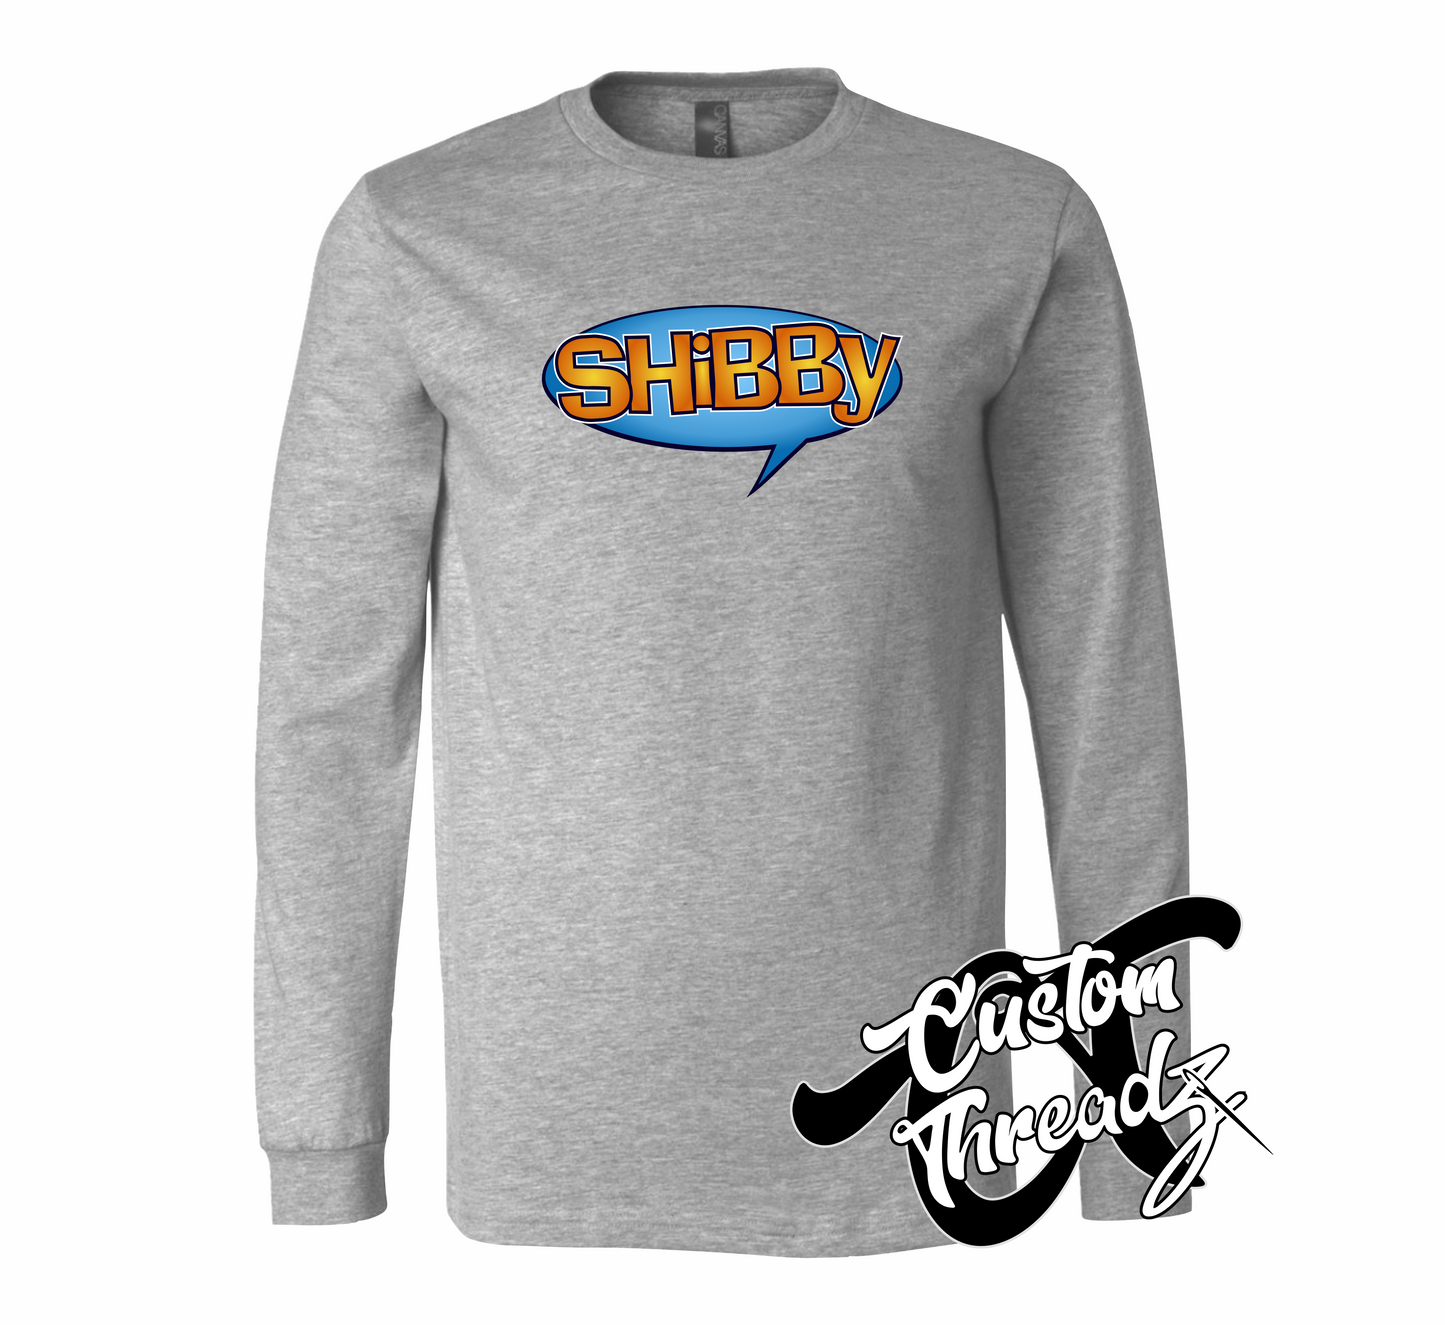 athletic heather grey long sleeve tee with shibby dude wheres my car DTG printed design